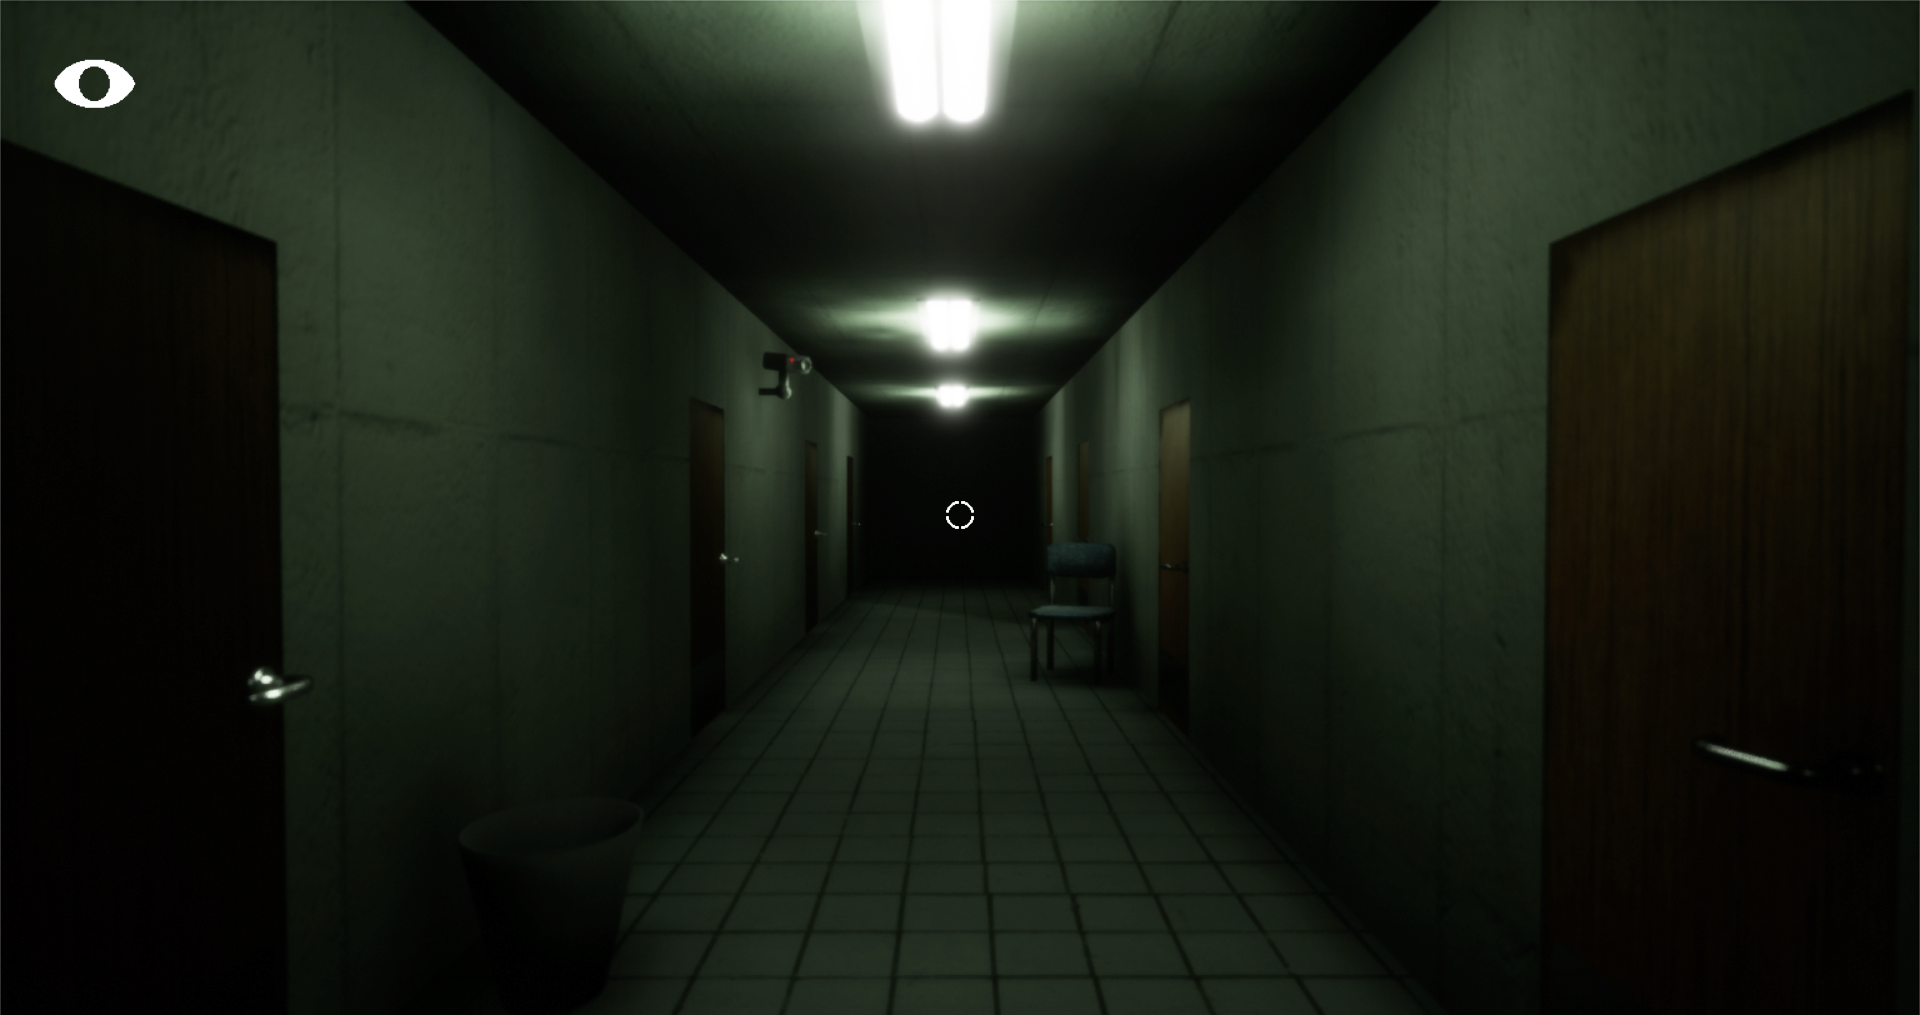 Eyes the Horror Game - Download & Play for PC